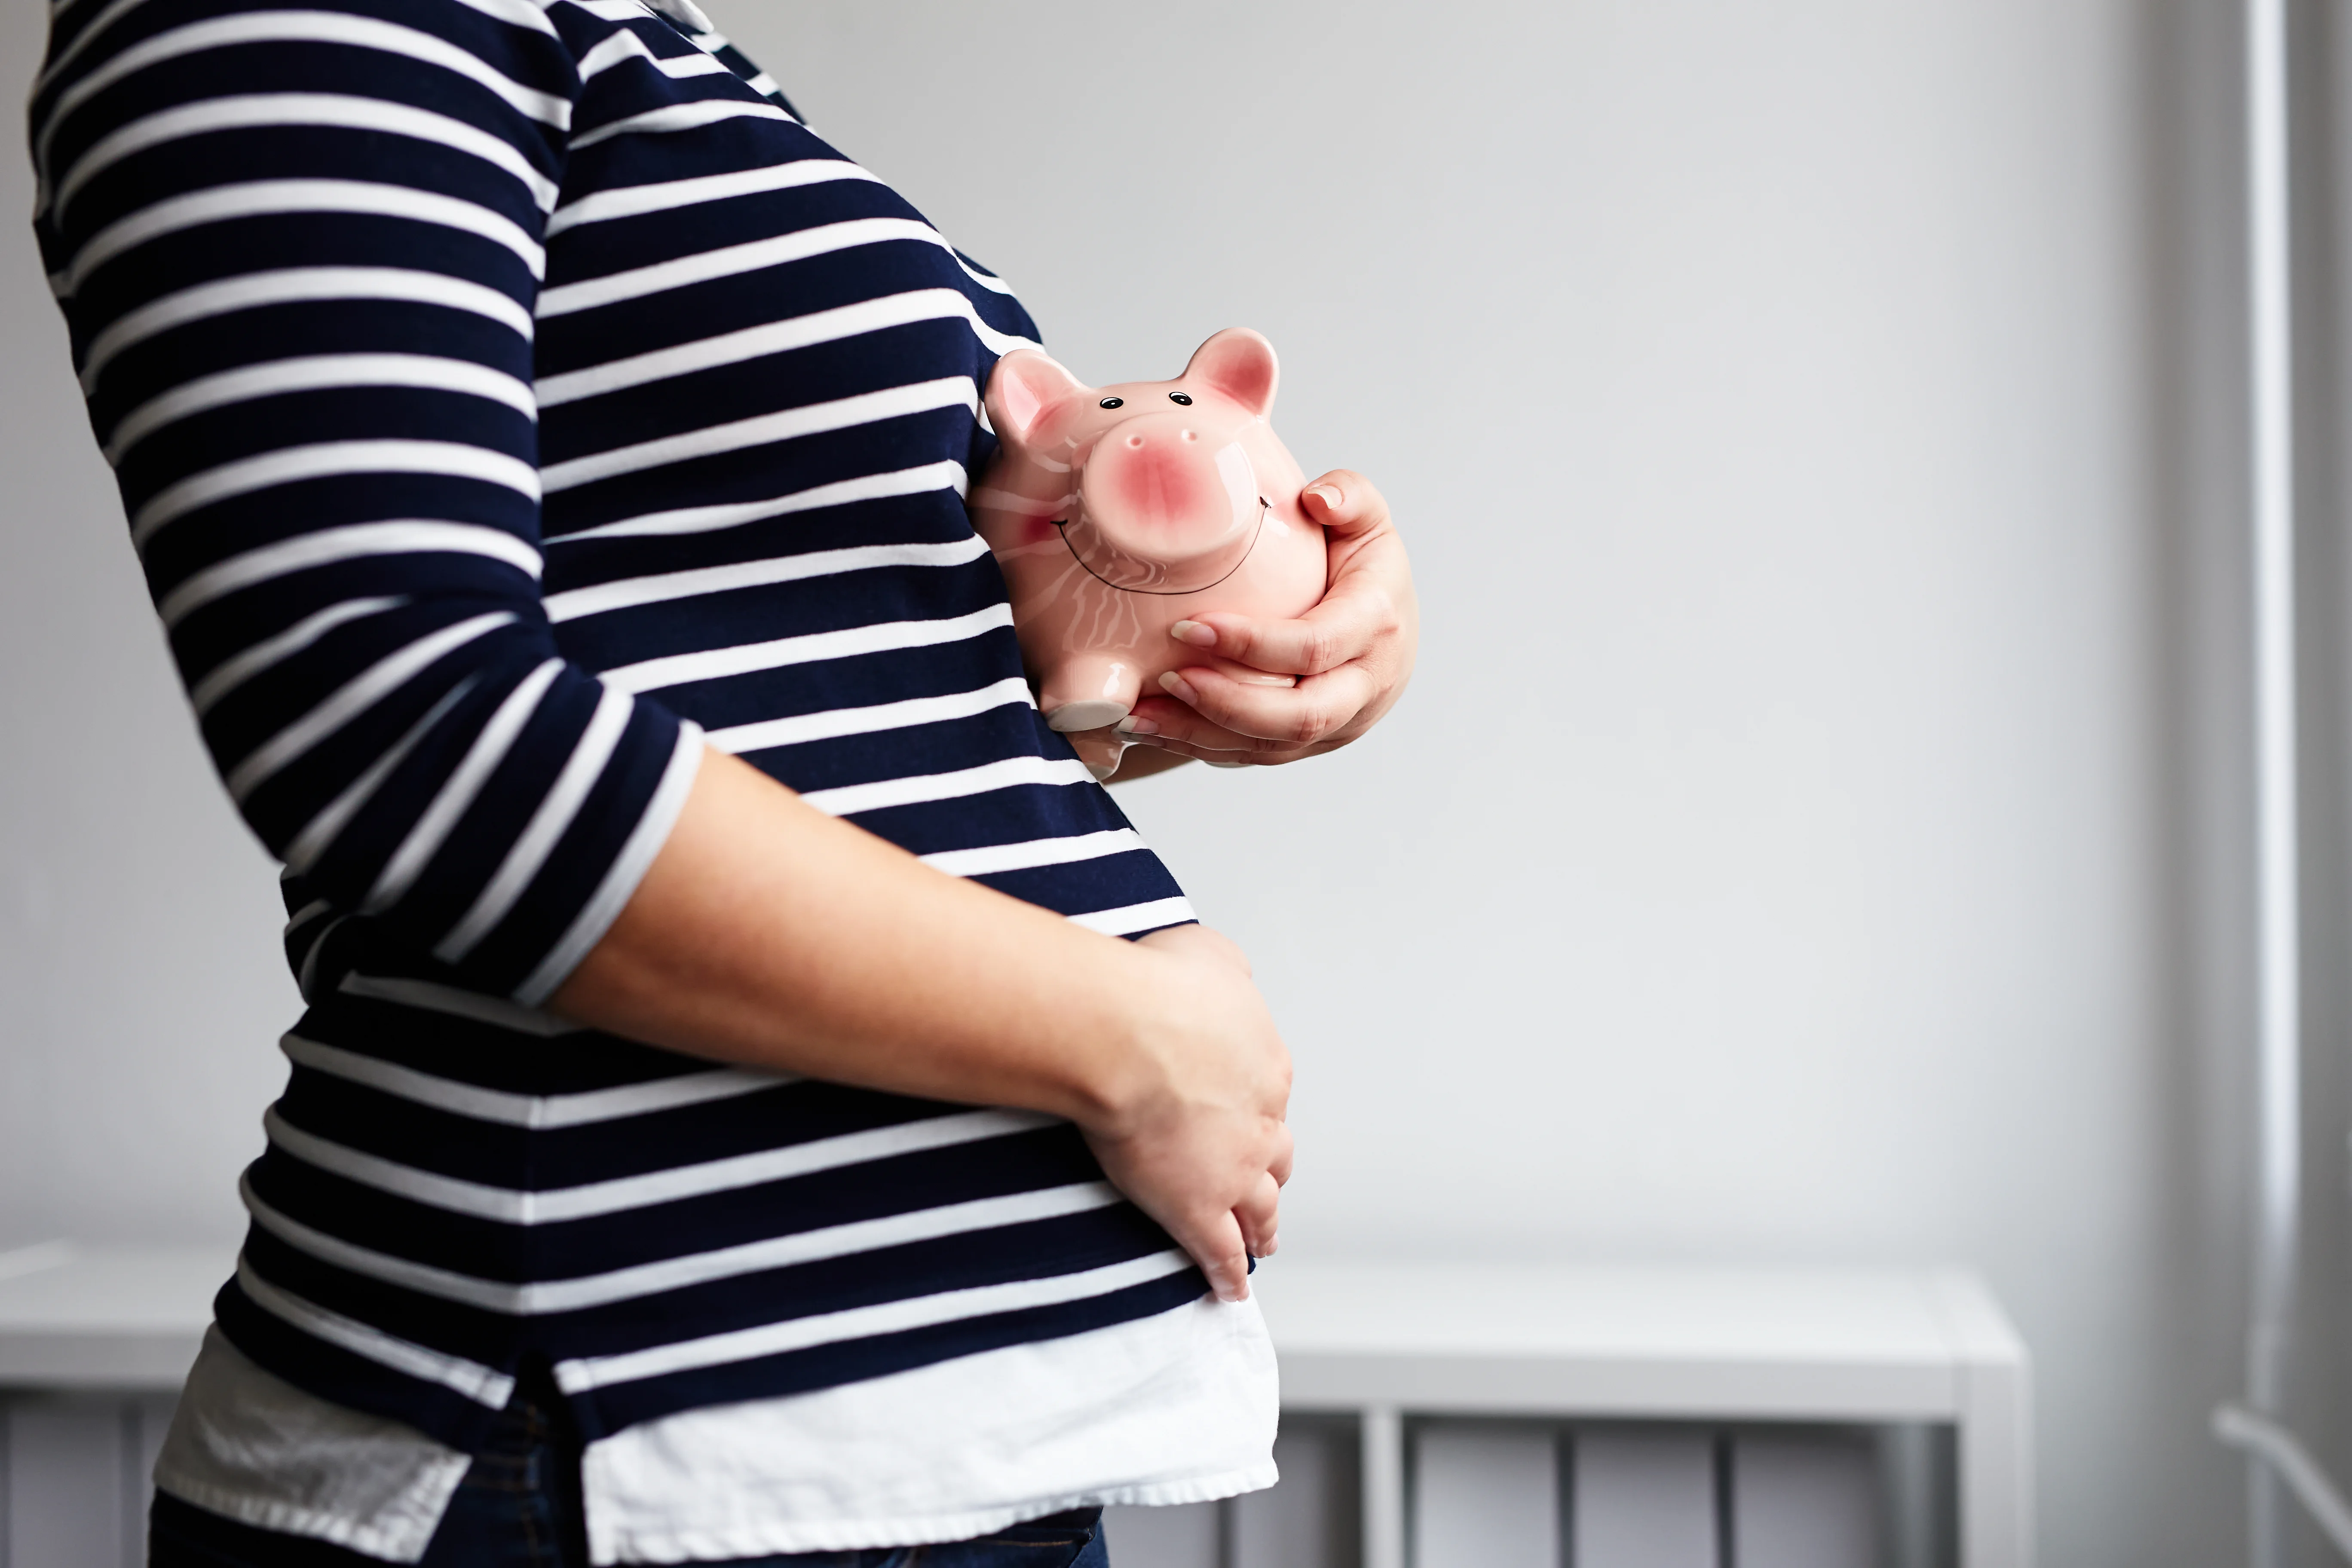 Planning to have a baby? Be sure you know the cost